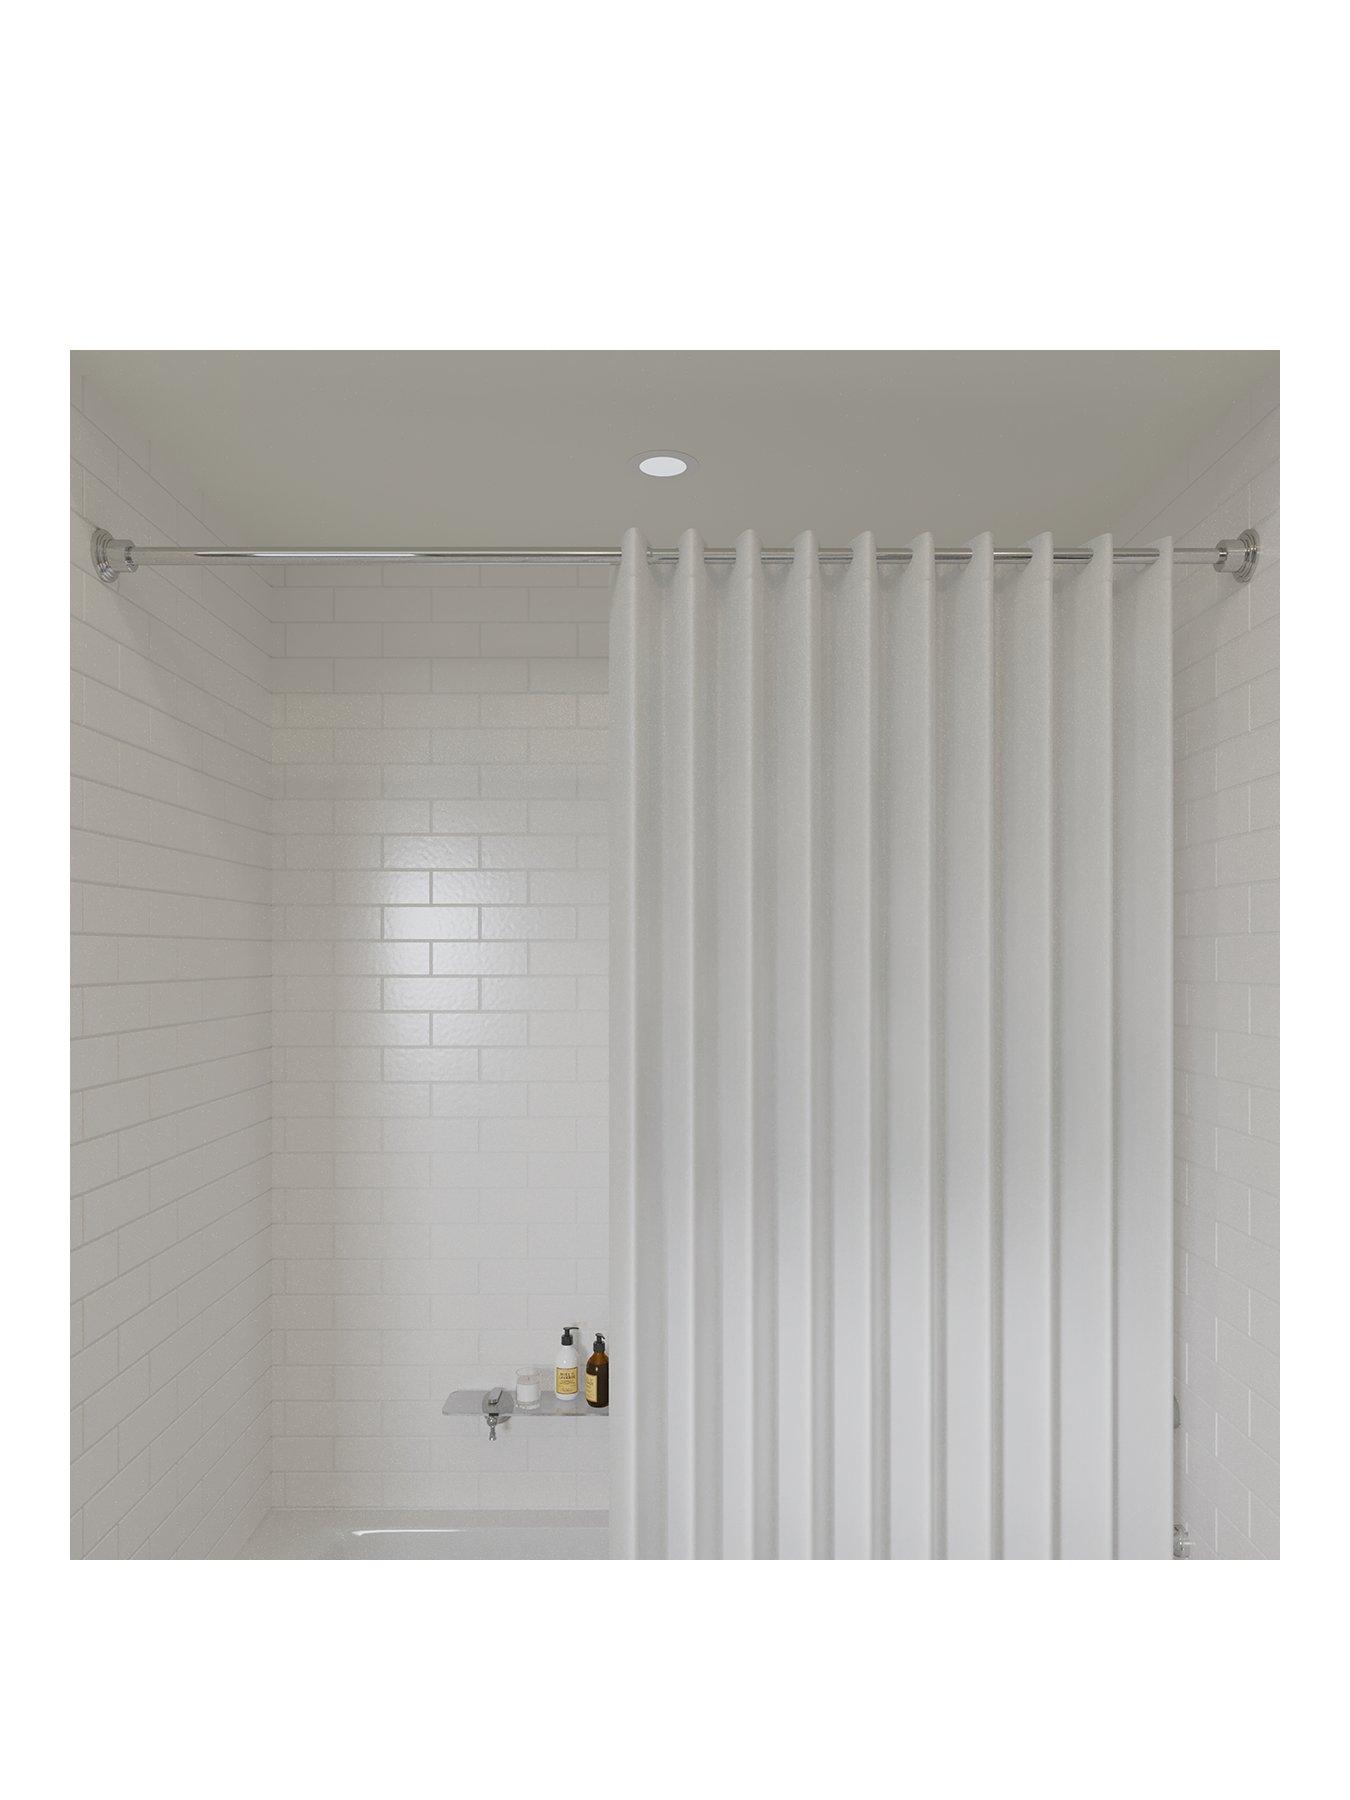 Rainbow Home Tension Pole Stainless Steel Shower Shelf